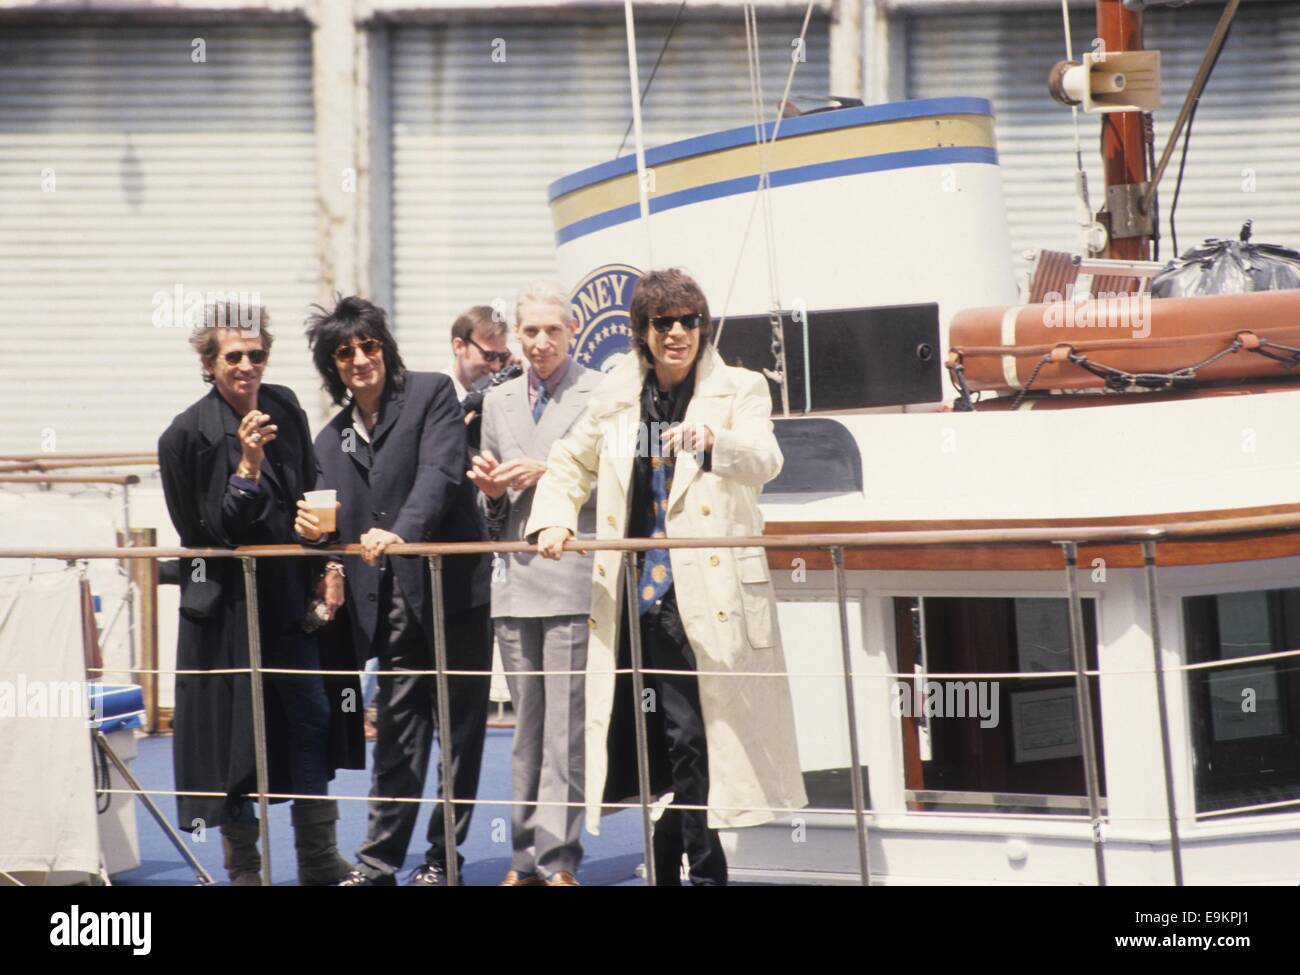 ROLLING STONE announ. Voodoo Lounge World Tour 1994.Mick Jagger, Keith Richards Ronnie Wood, Charlie Watts.l8159ar. © Andrea Renault/Globe Photos/ZUMA Wire/Alamy Live News Stock Photo